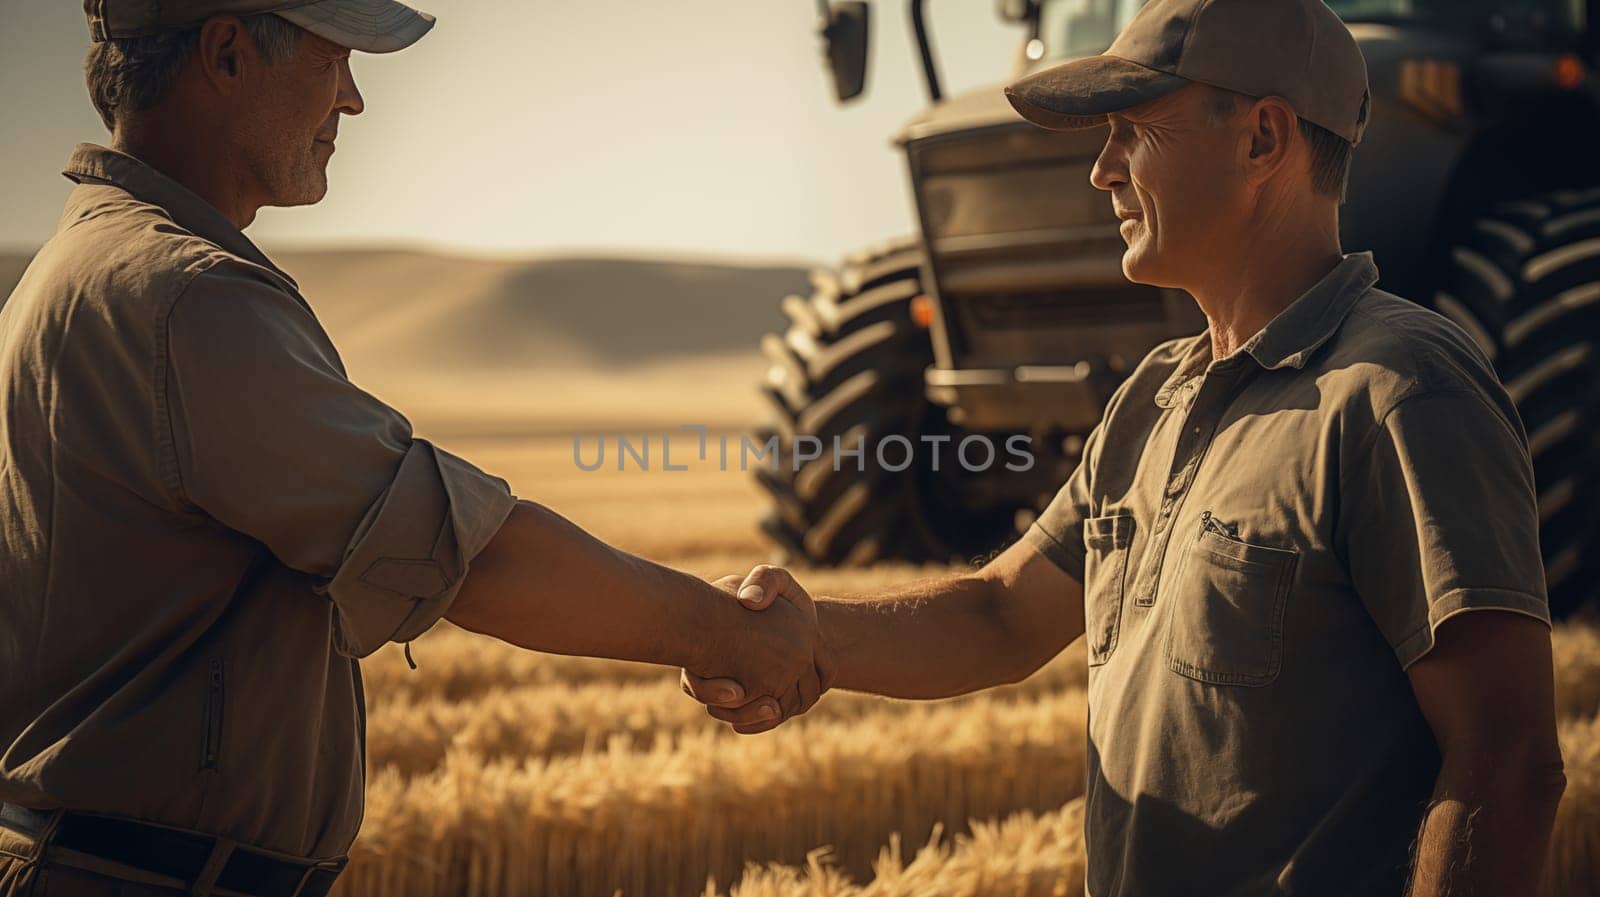 two farmers in shirts on the background of a wheat field with a tractor, shaking hands.